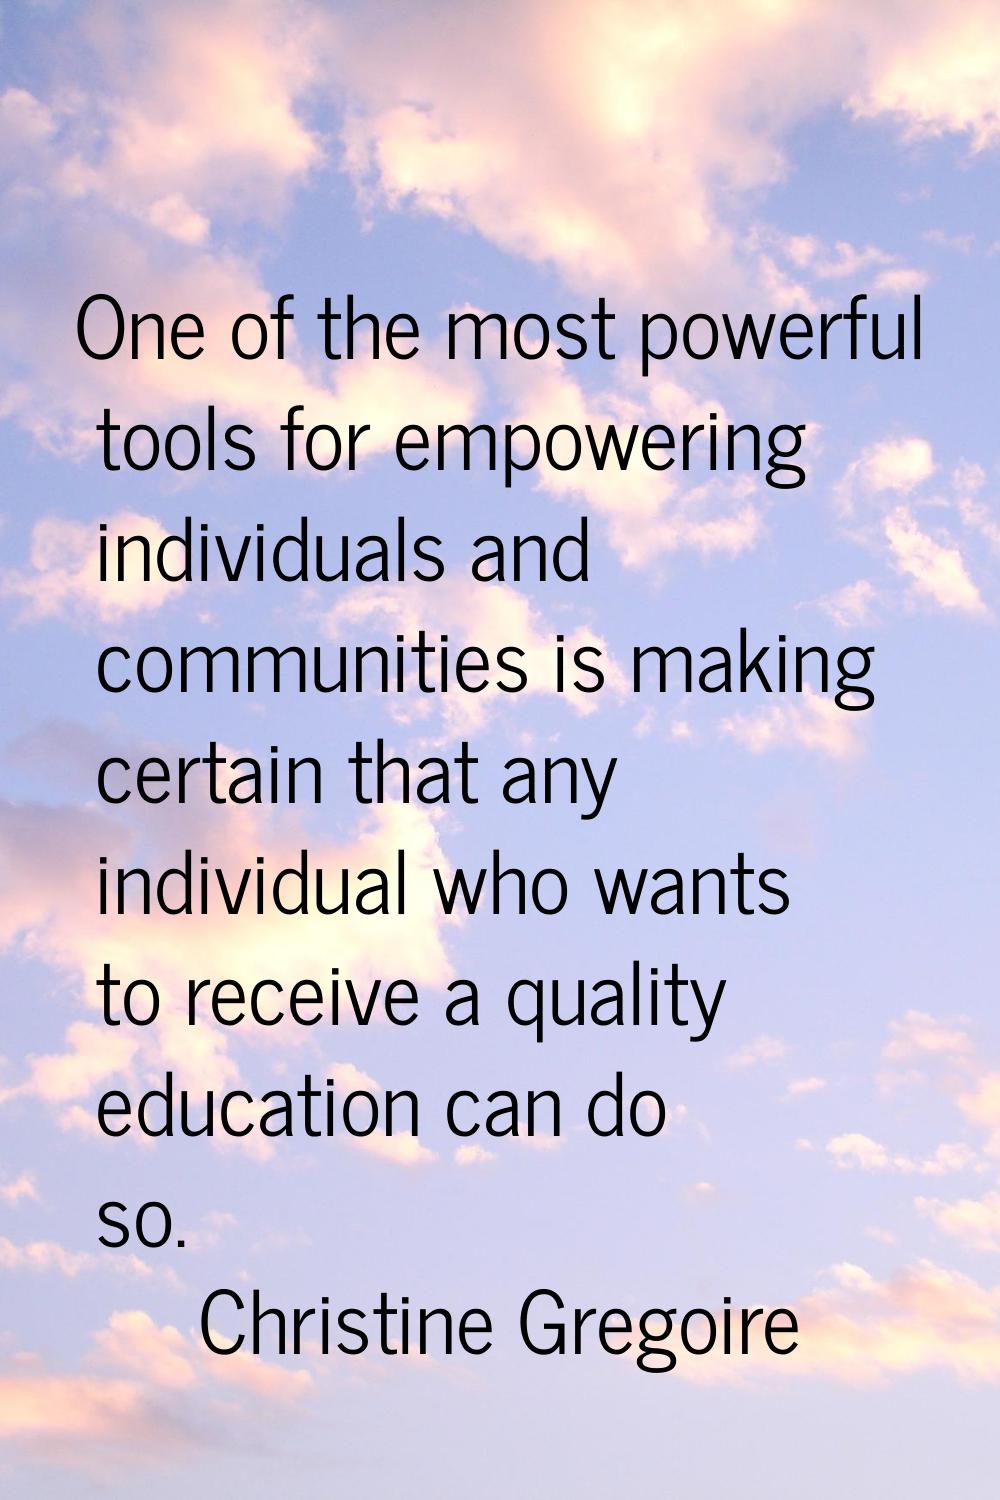 One of the most powerful tools for empowering individuals and communities is making certain that an